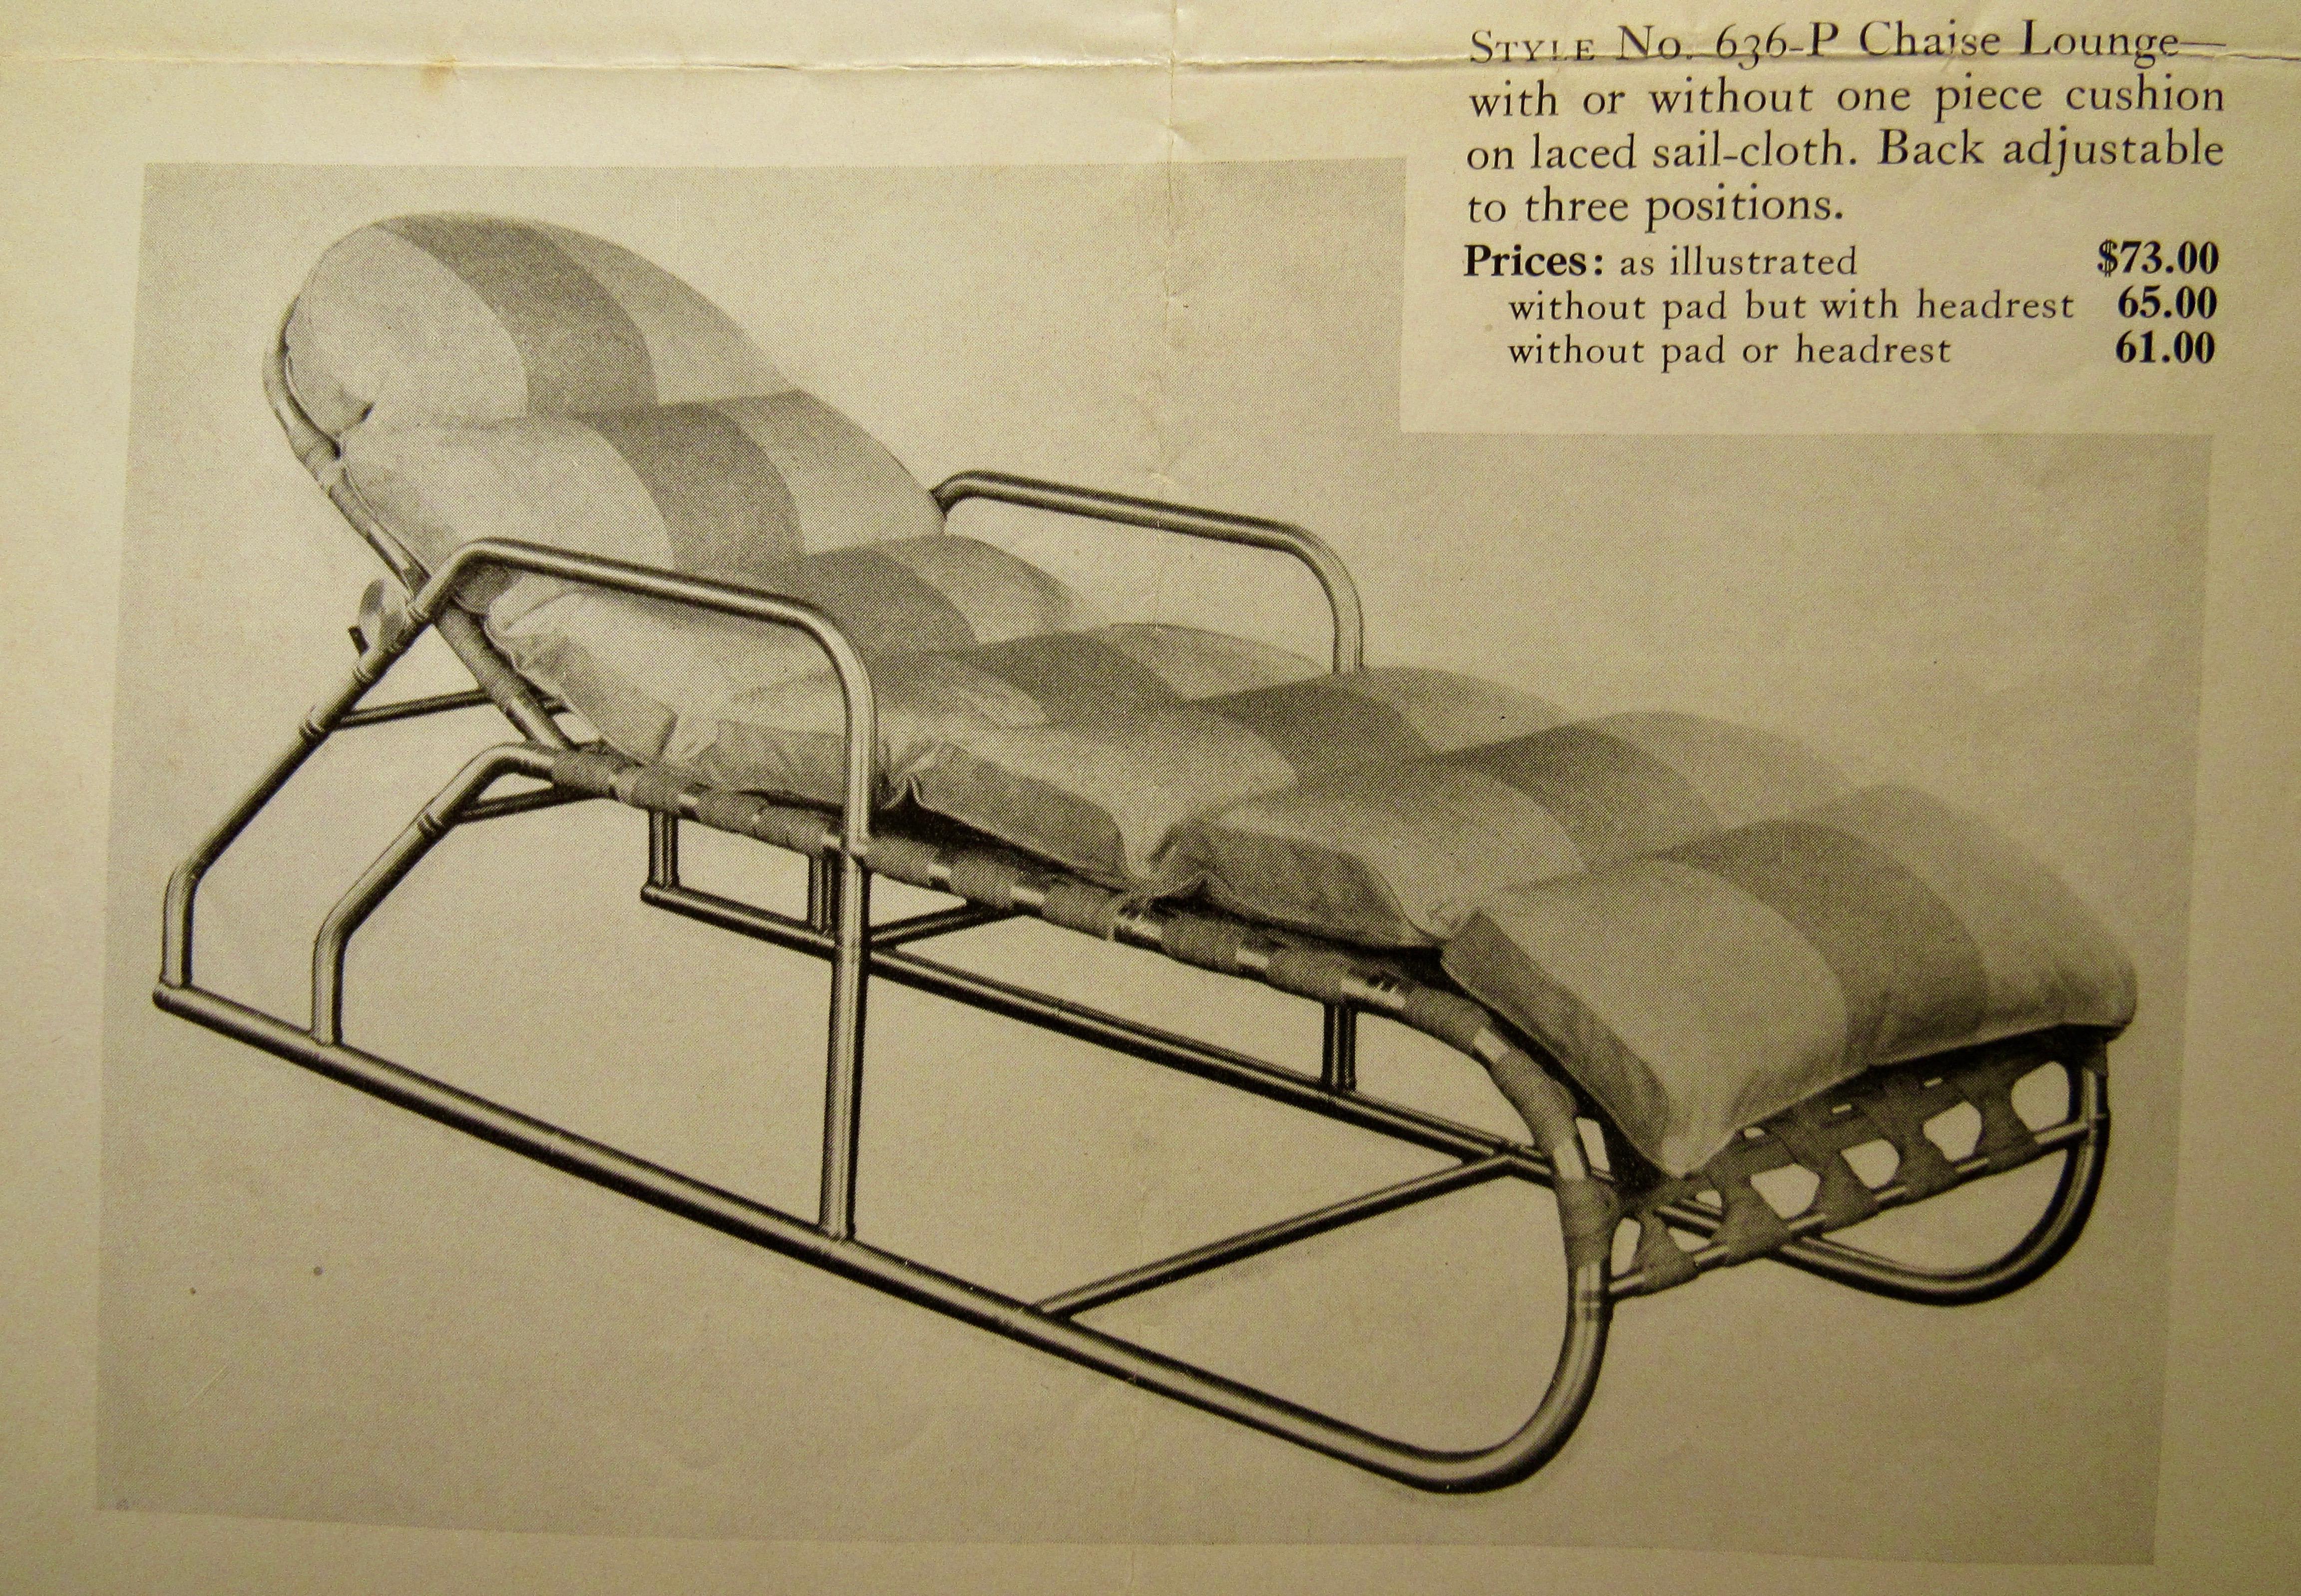 Warren McArthur Adjustable Chaise Style No. 636, circa 1938 For Sale 1